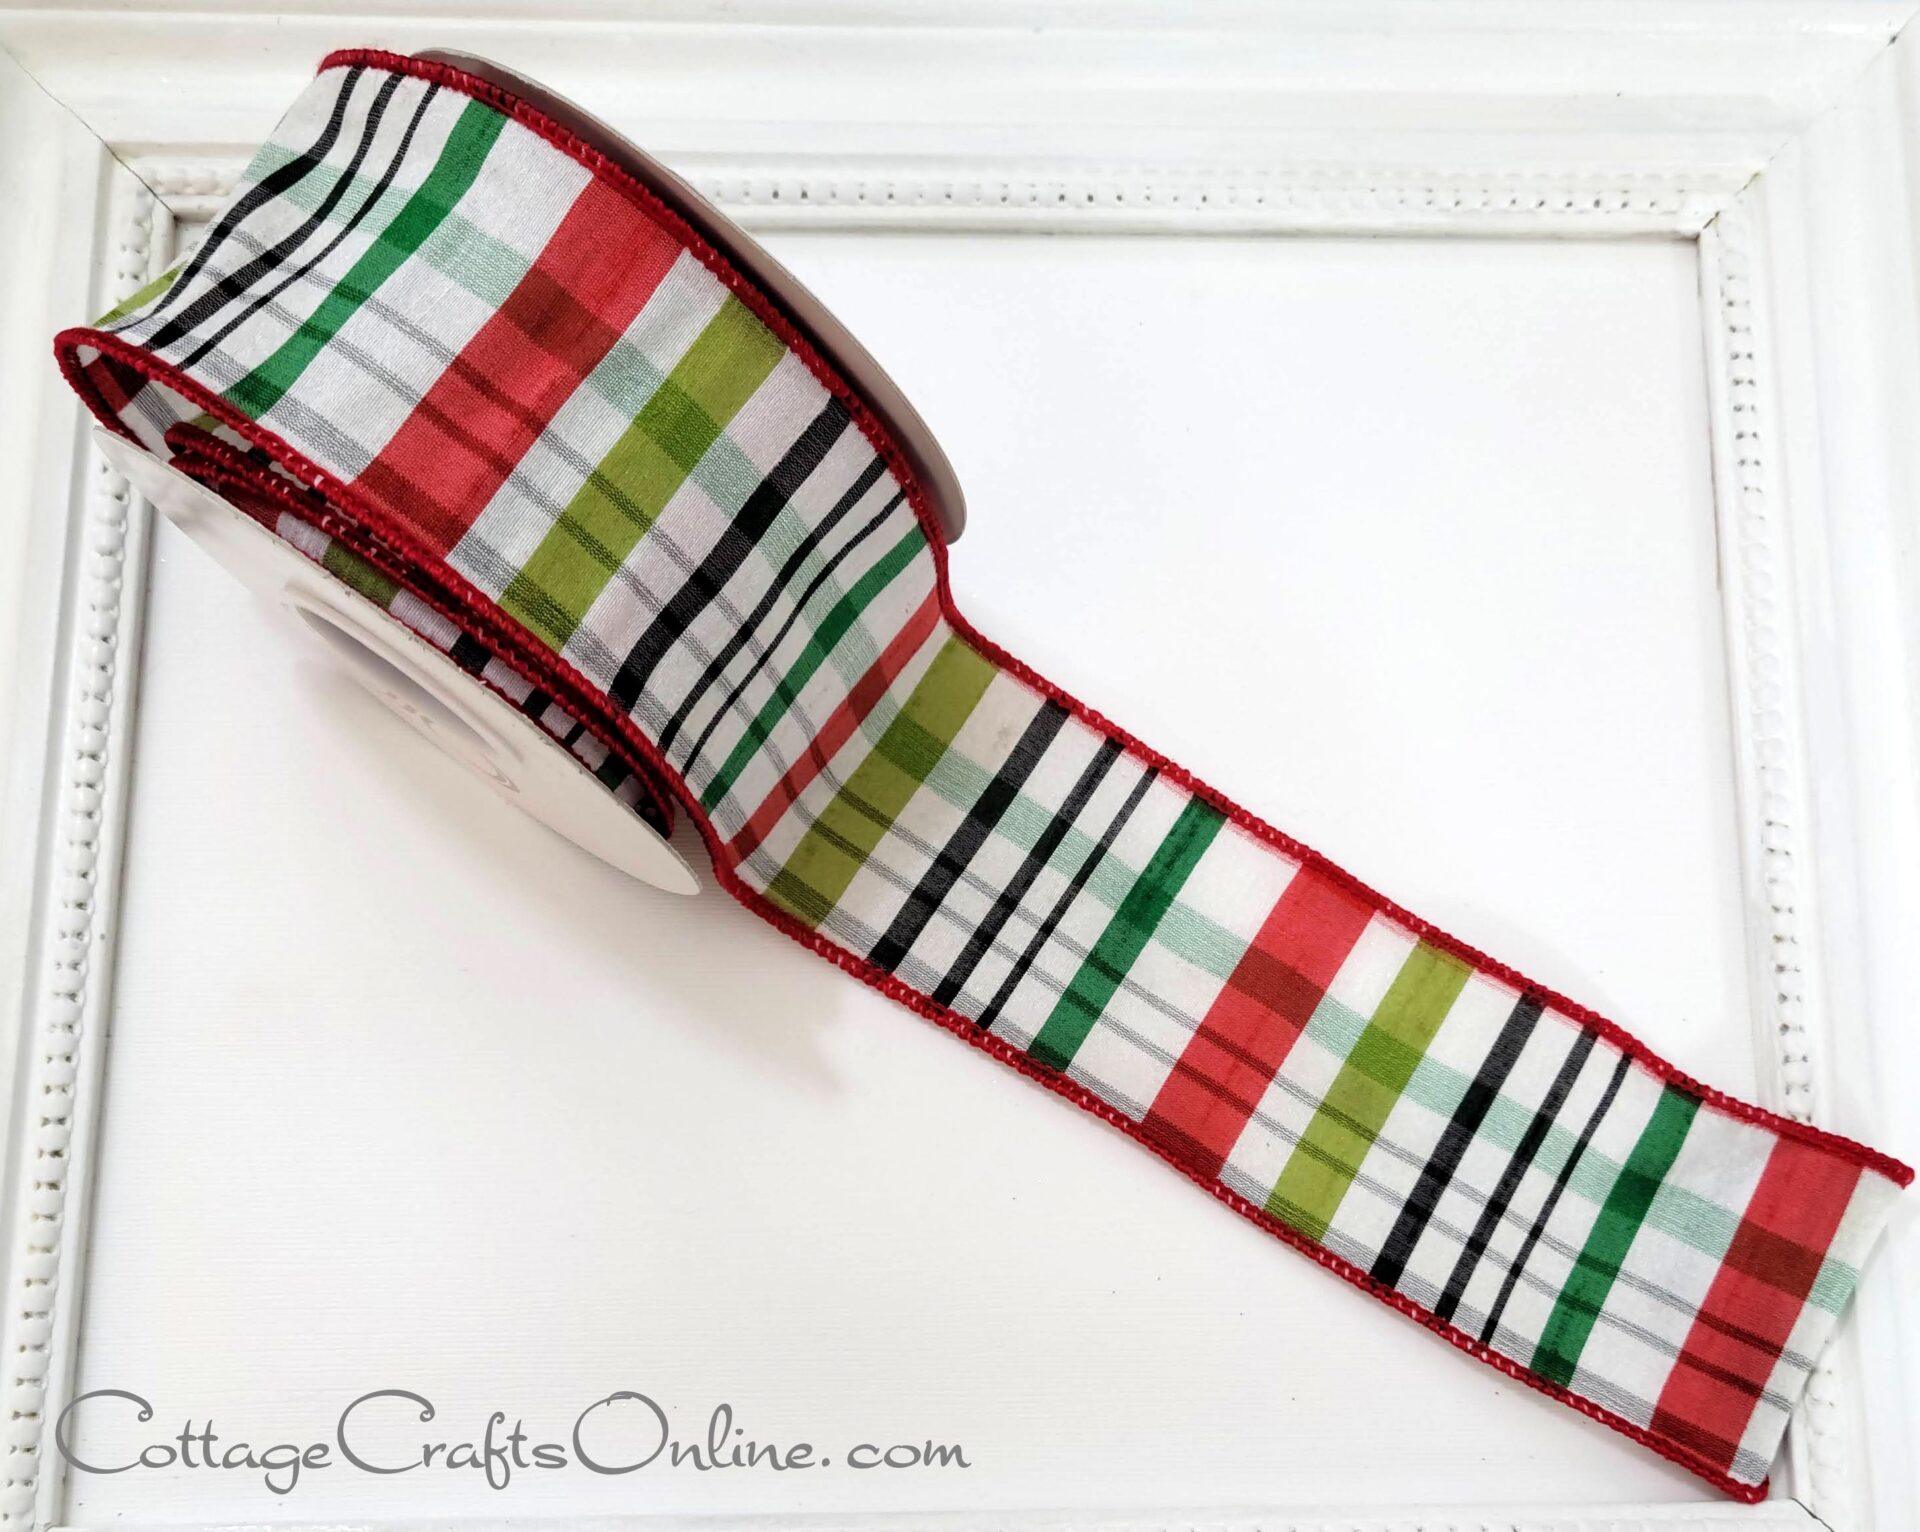 A new plaid ribbon in red, green, and black decorates a white frame.